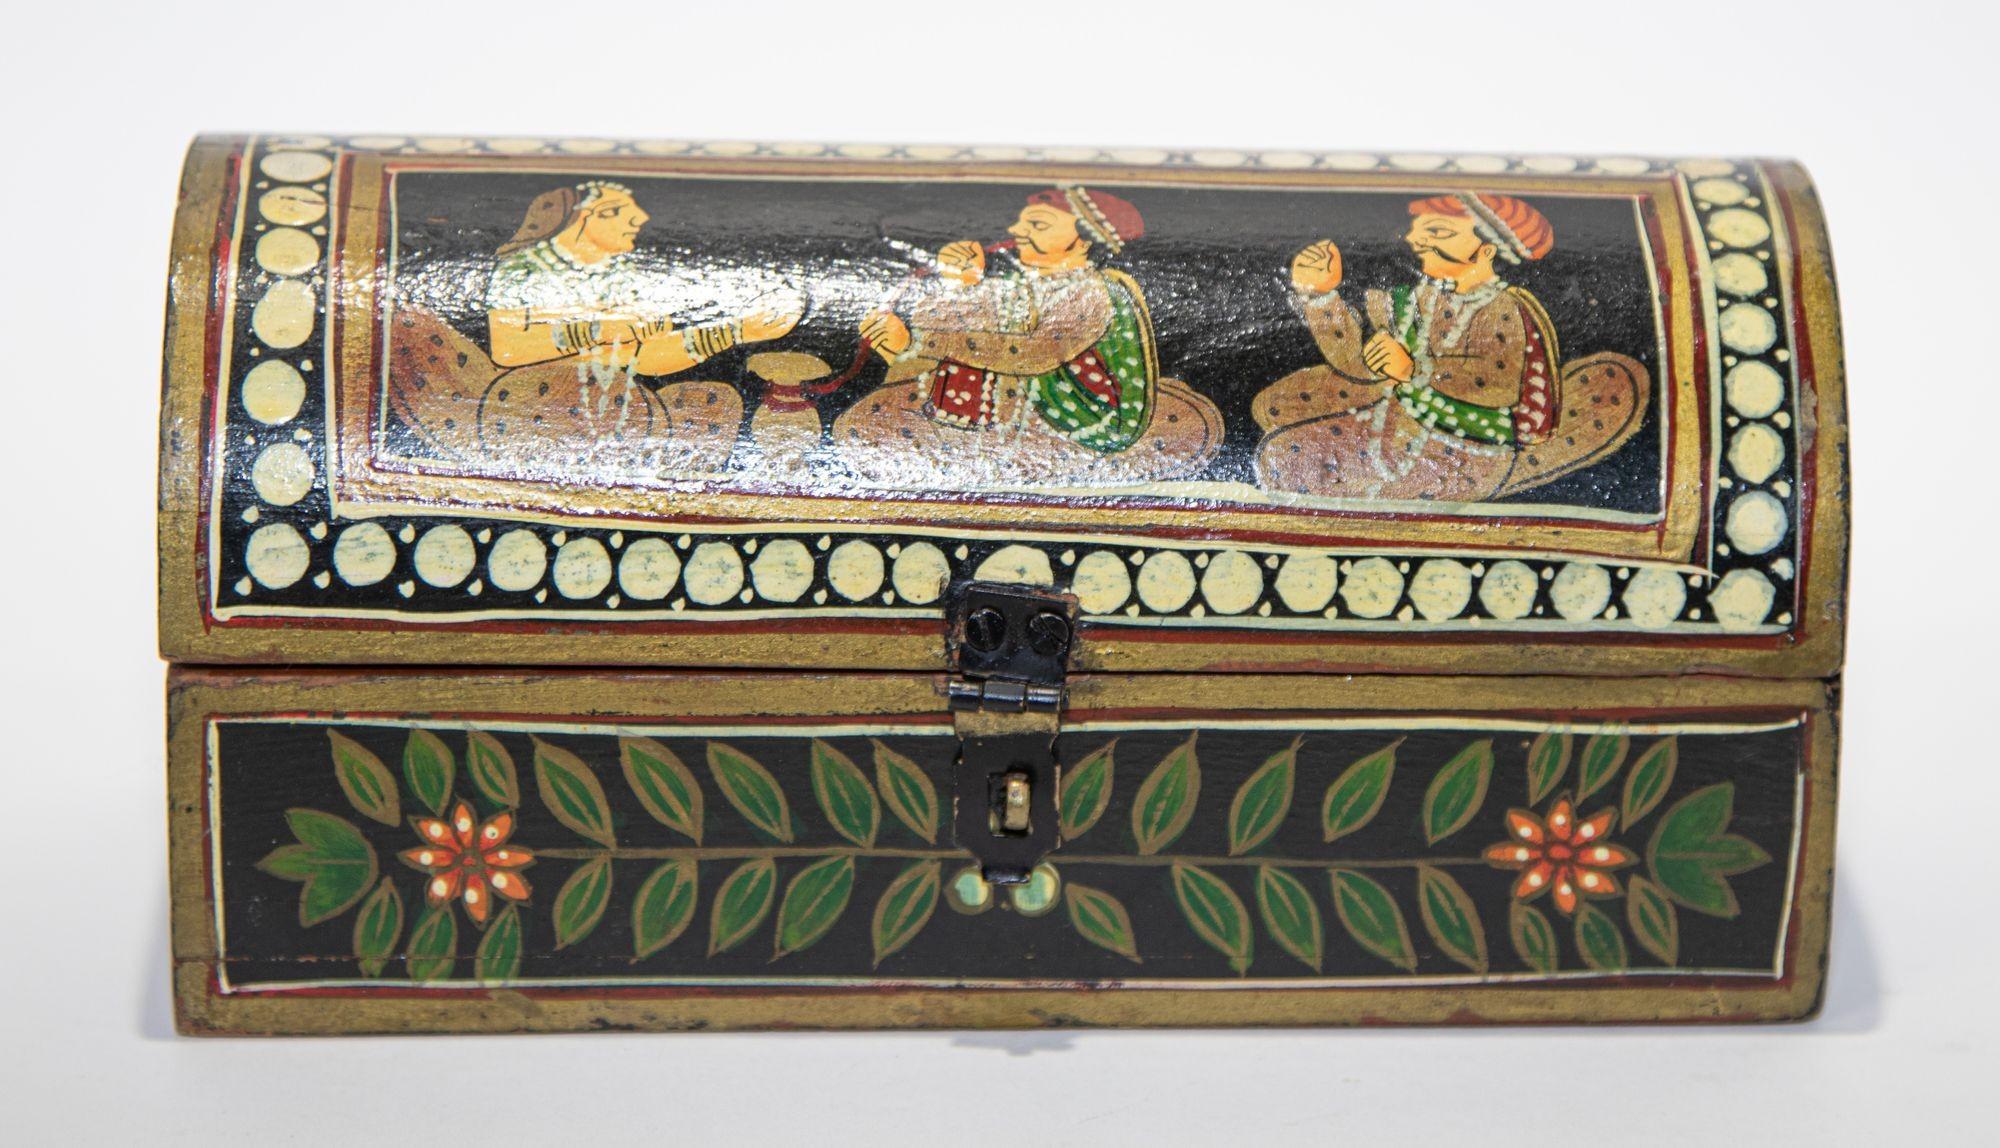 The rectangular Indian pen box with domed hinged lid is hand-painted with colorful figural Maharajah court scenes on top and floral designs on each side.
Hand painted Rajasthani decorative writing pen box.
In great vintage condition with